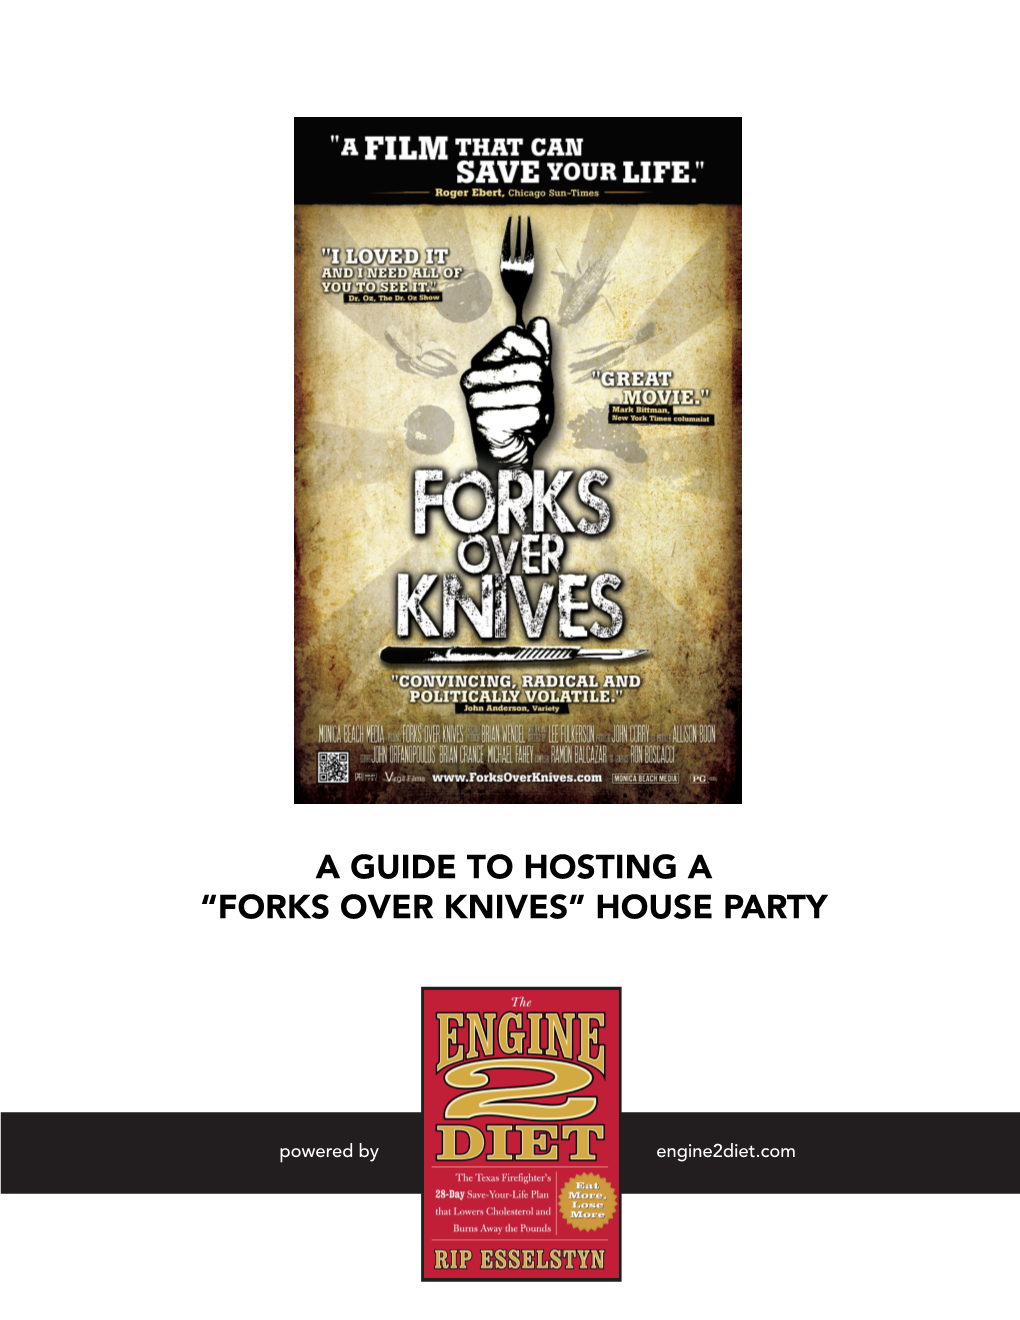 A Guide to Hosting a “Forks Over Knives” House Party